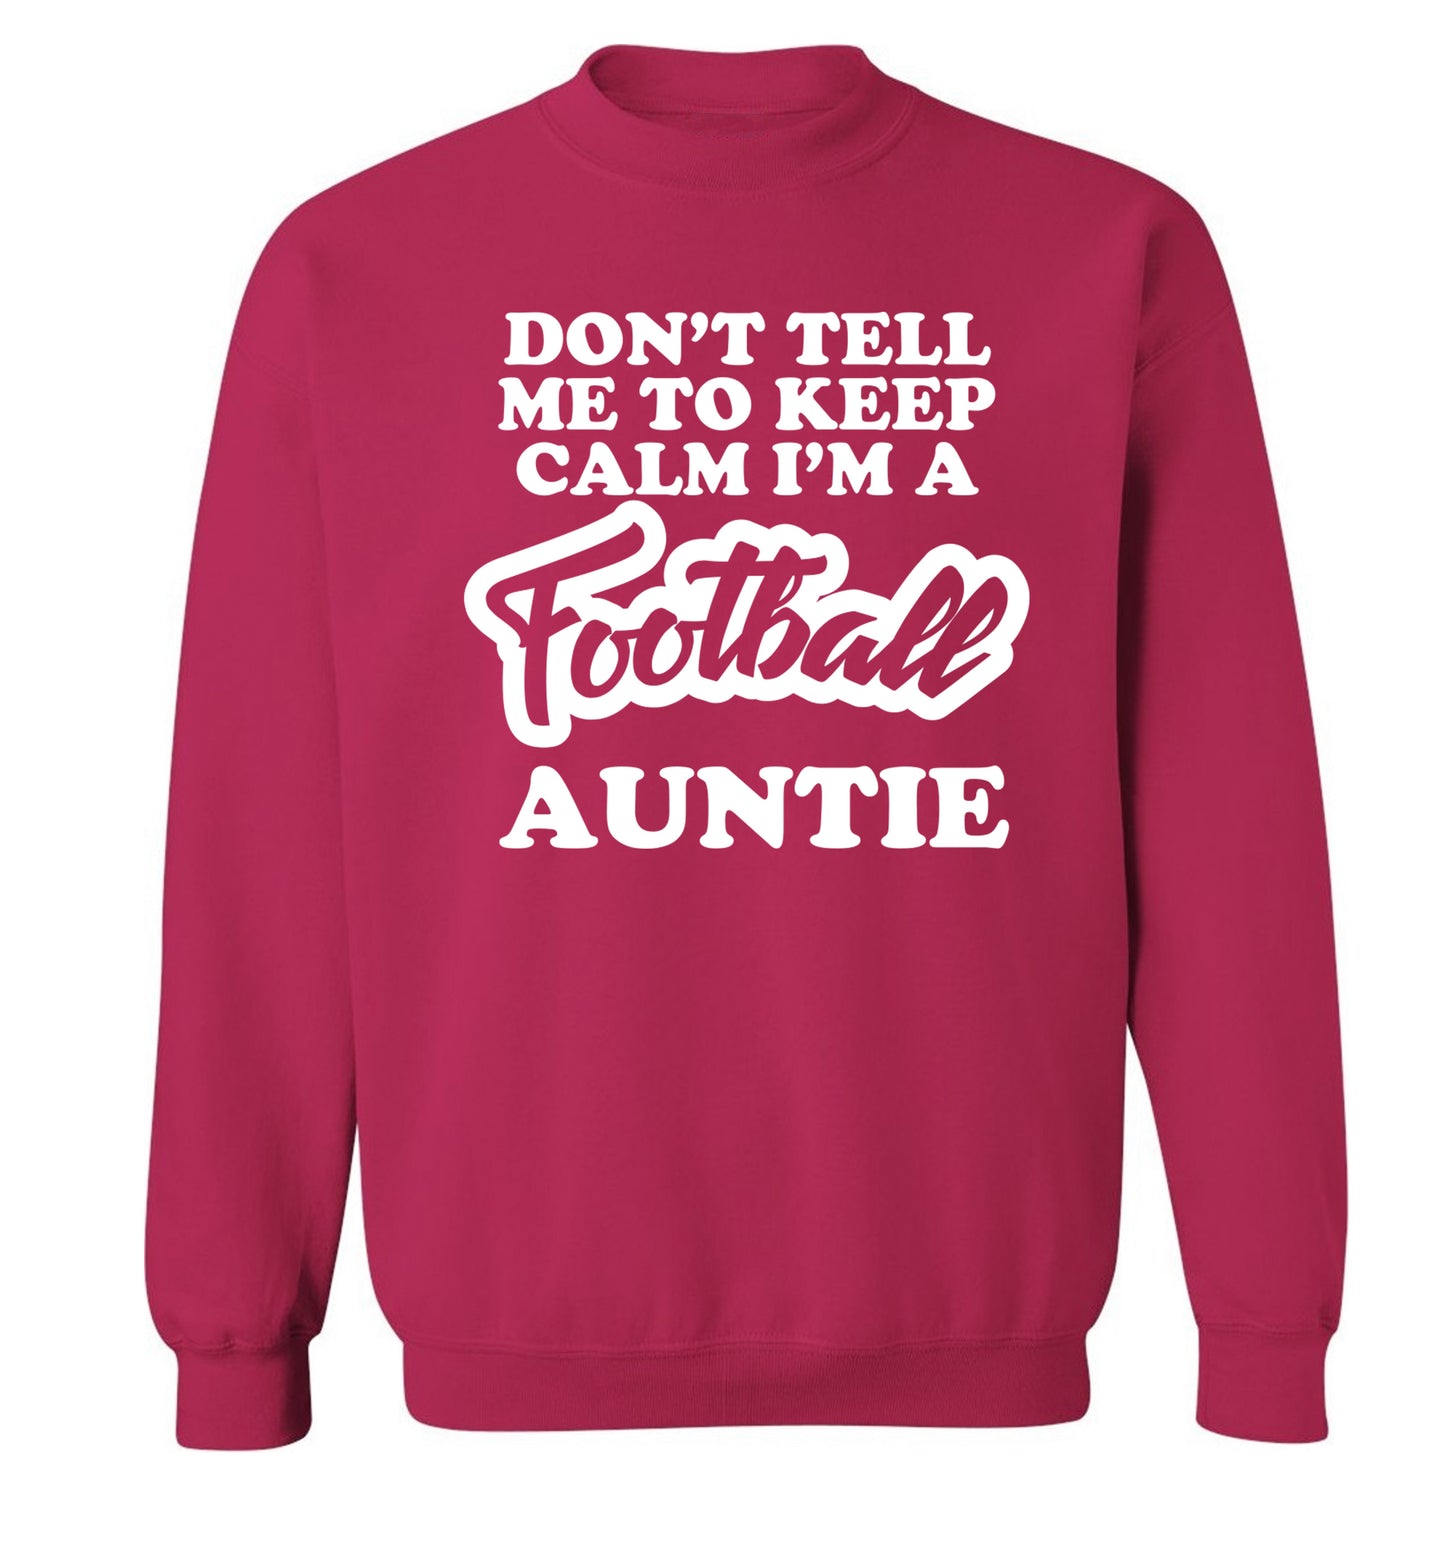 Don't tell me to keep calm I'm a football auntie Adult's unisexpink Sweater 2XL